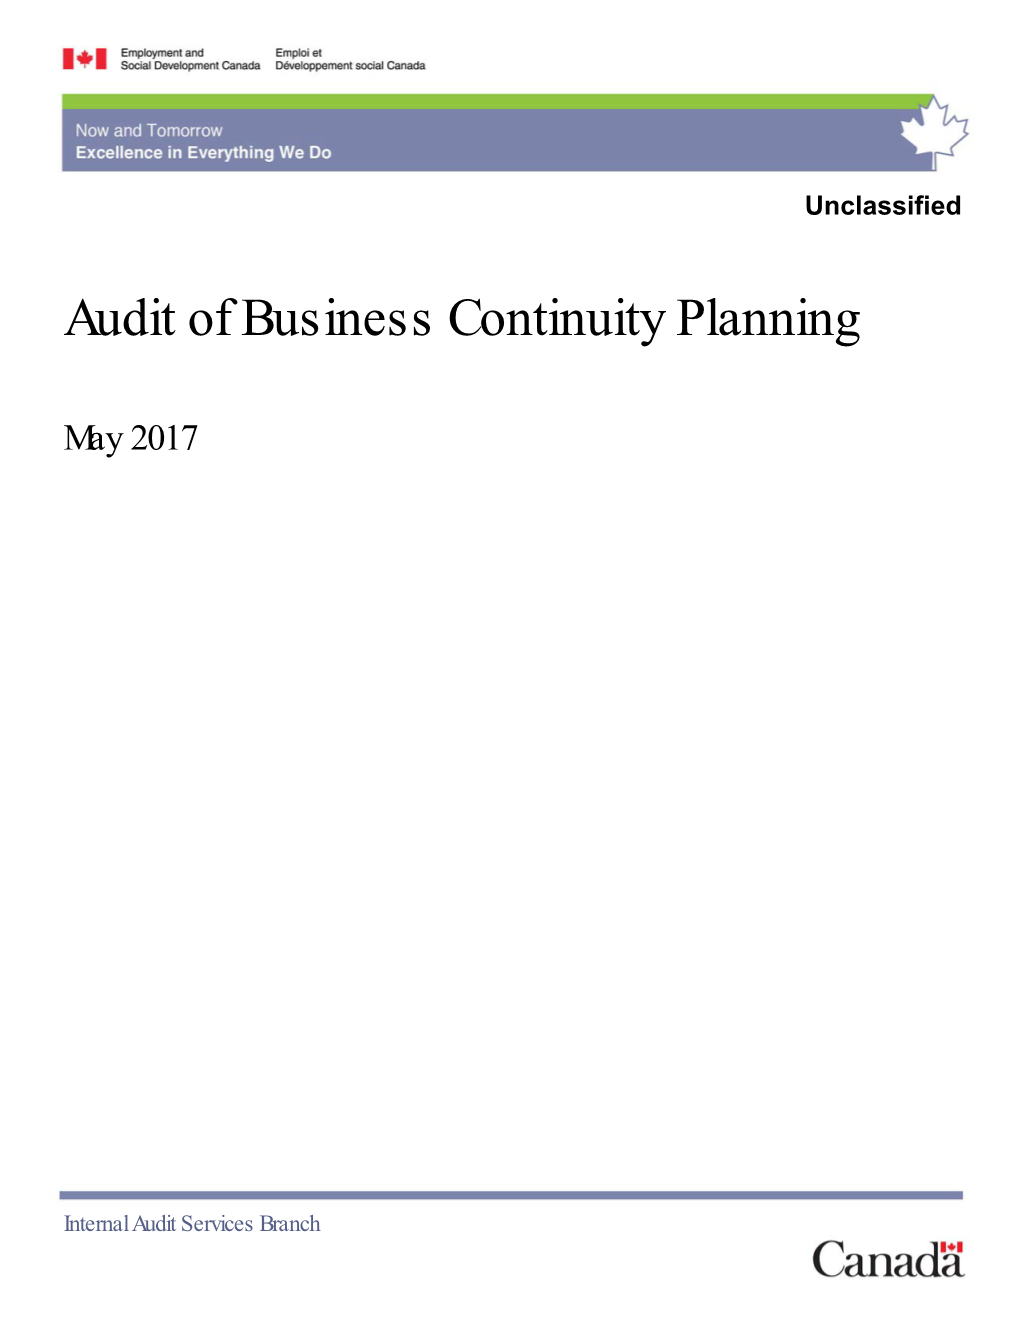 Audit of Business Continuity Planning